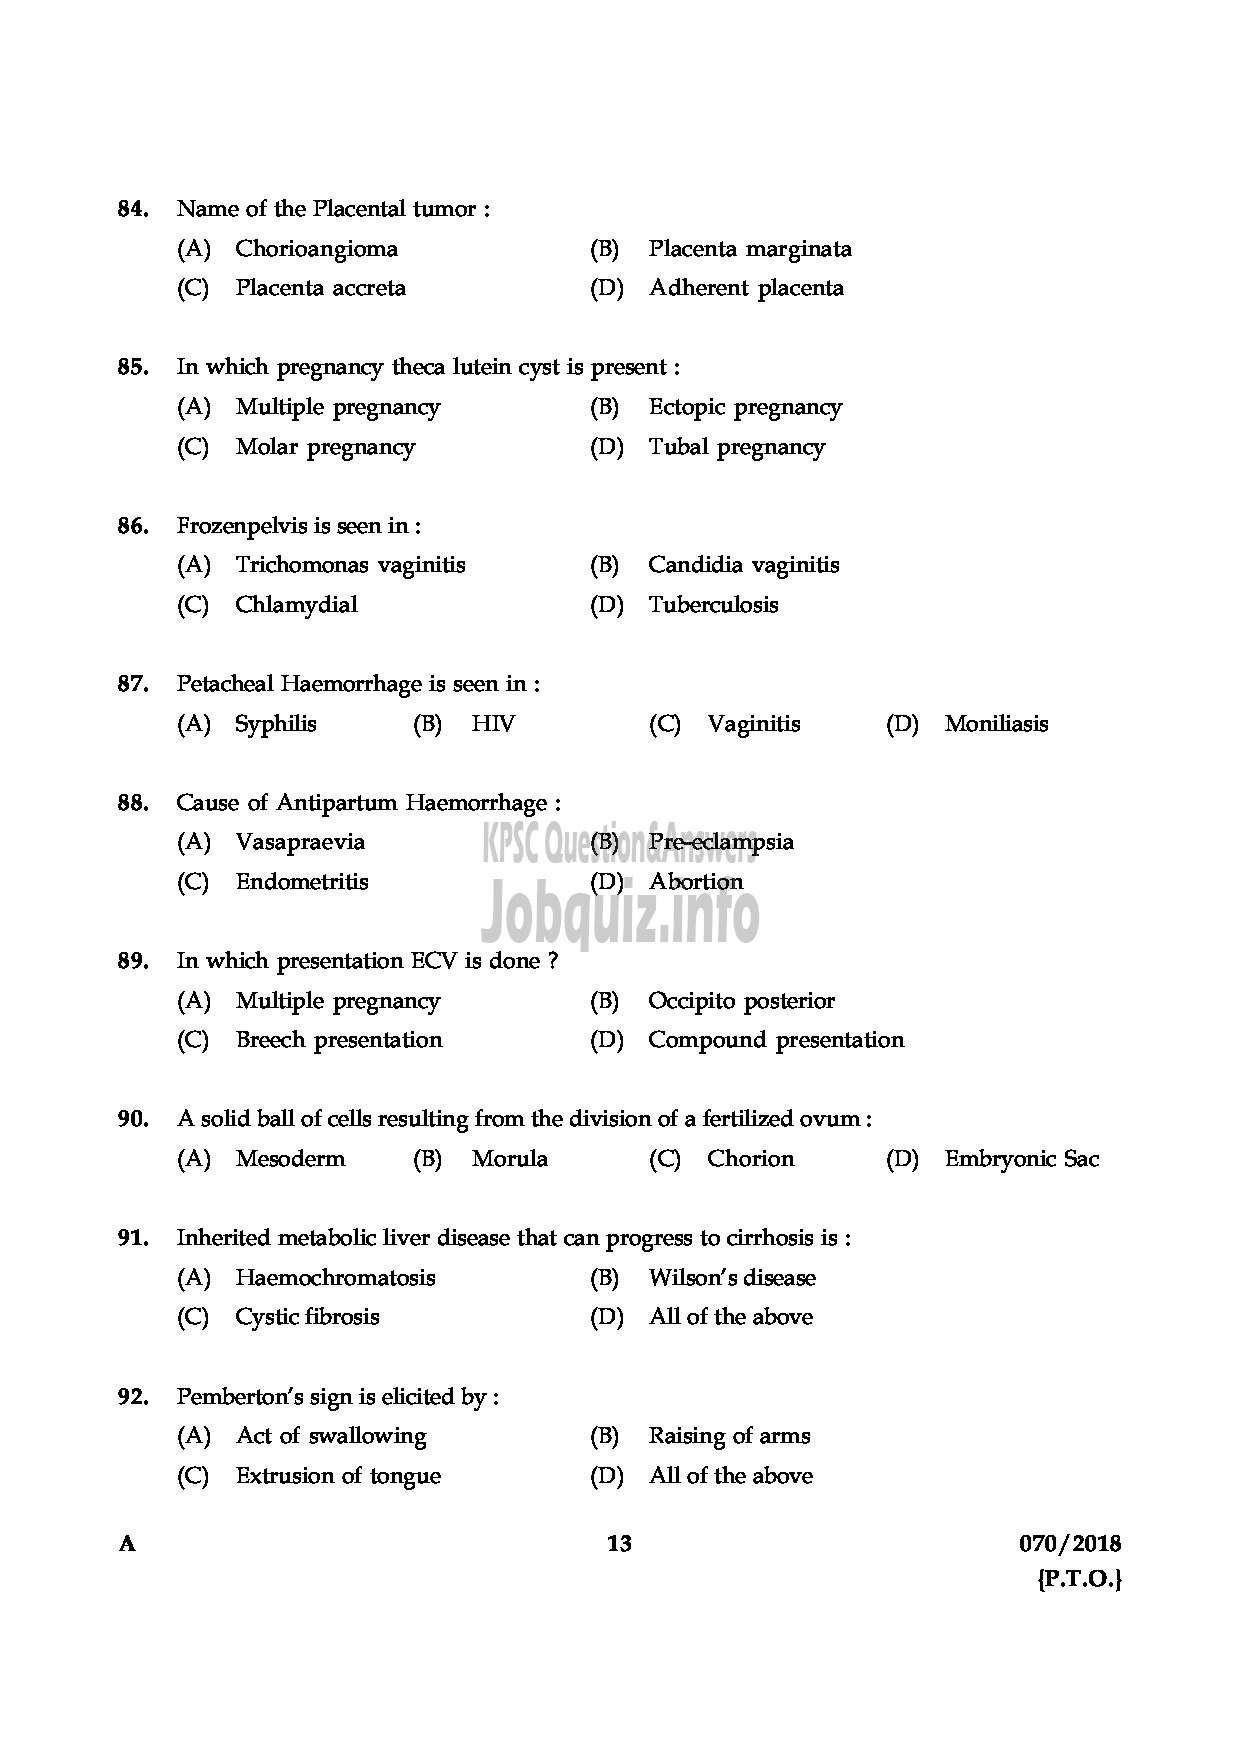 Kerala PSC Question Paper - MEDICAL OFFICER HOMOEO/ ASSISTANT INSURANCE MEDICAL OFFICER HOMOEO HOMOEOPATHY/ INSURANCE MEDICAL SERVICES-13